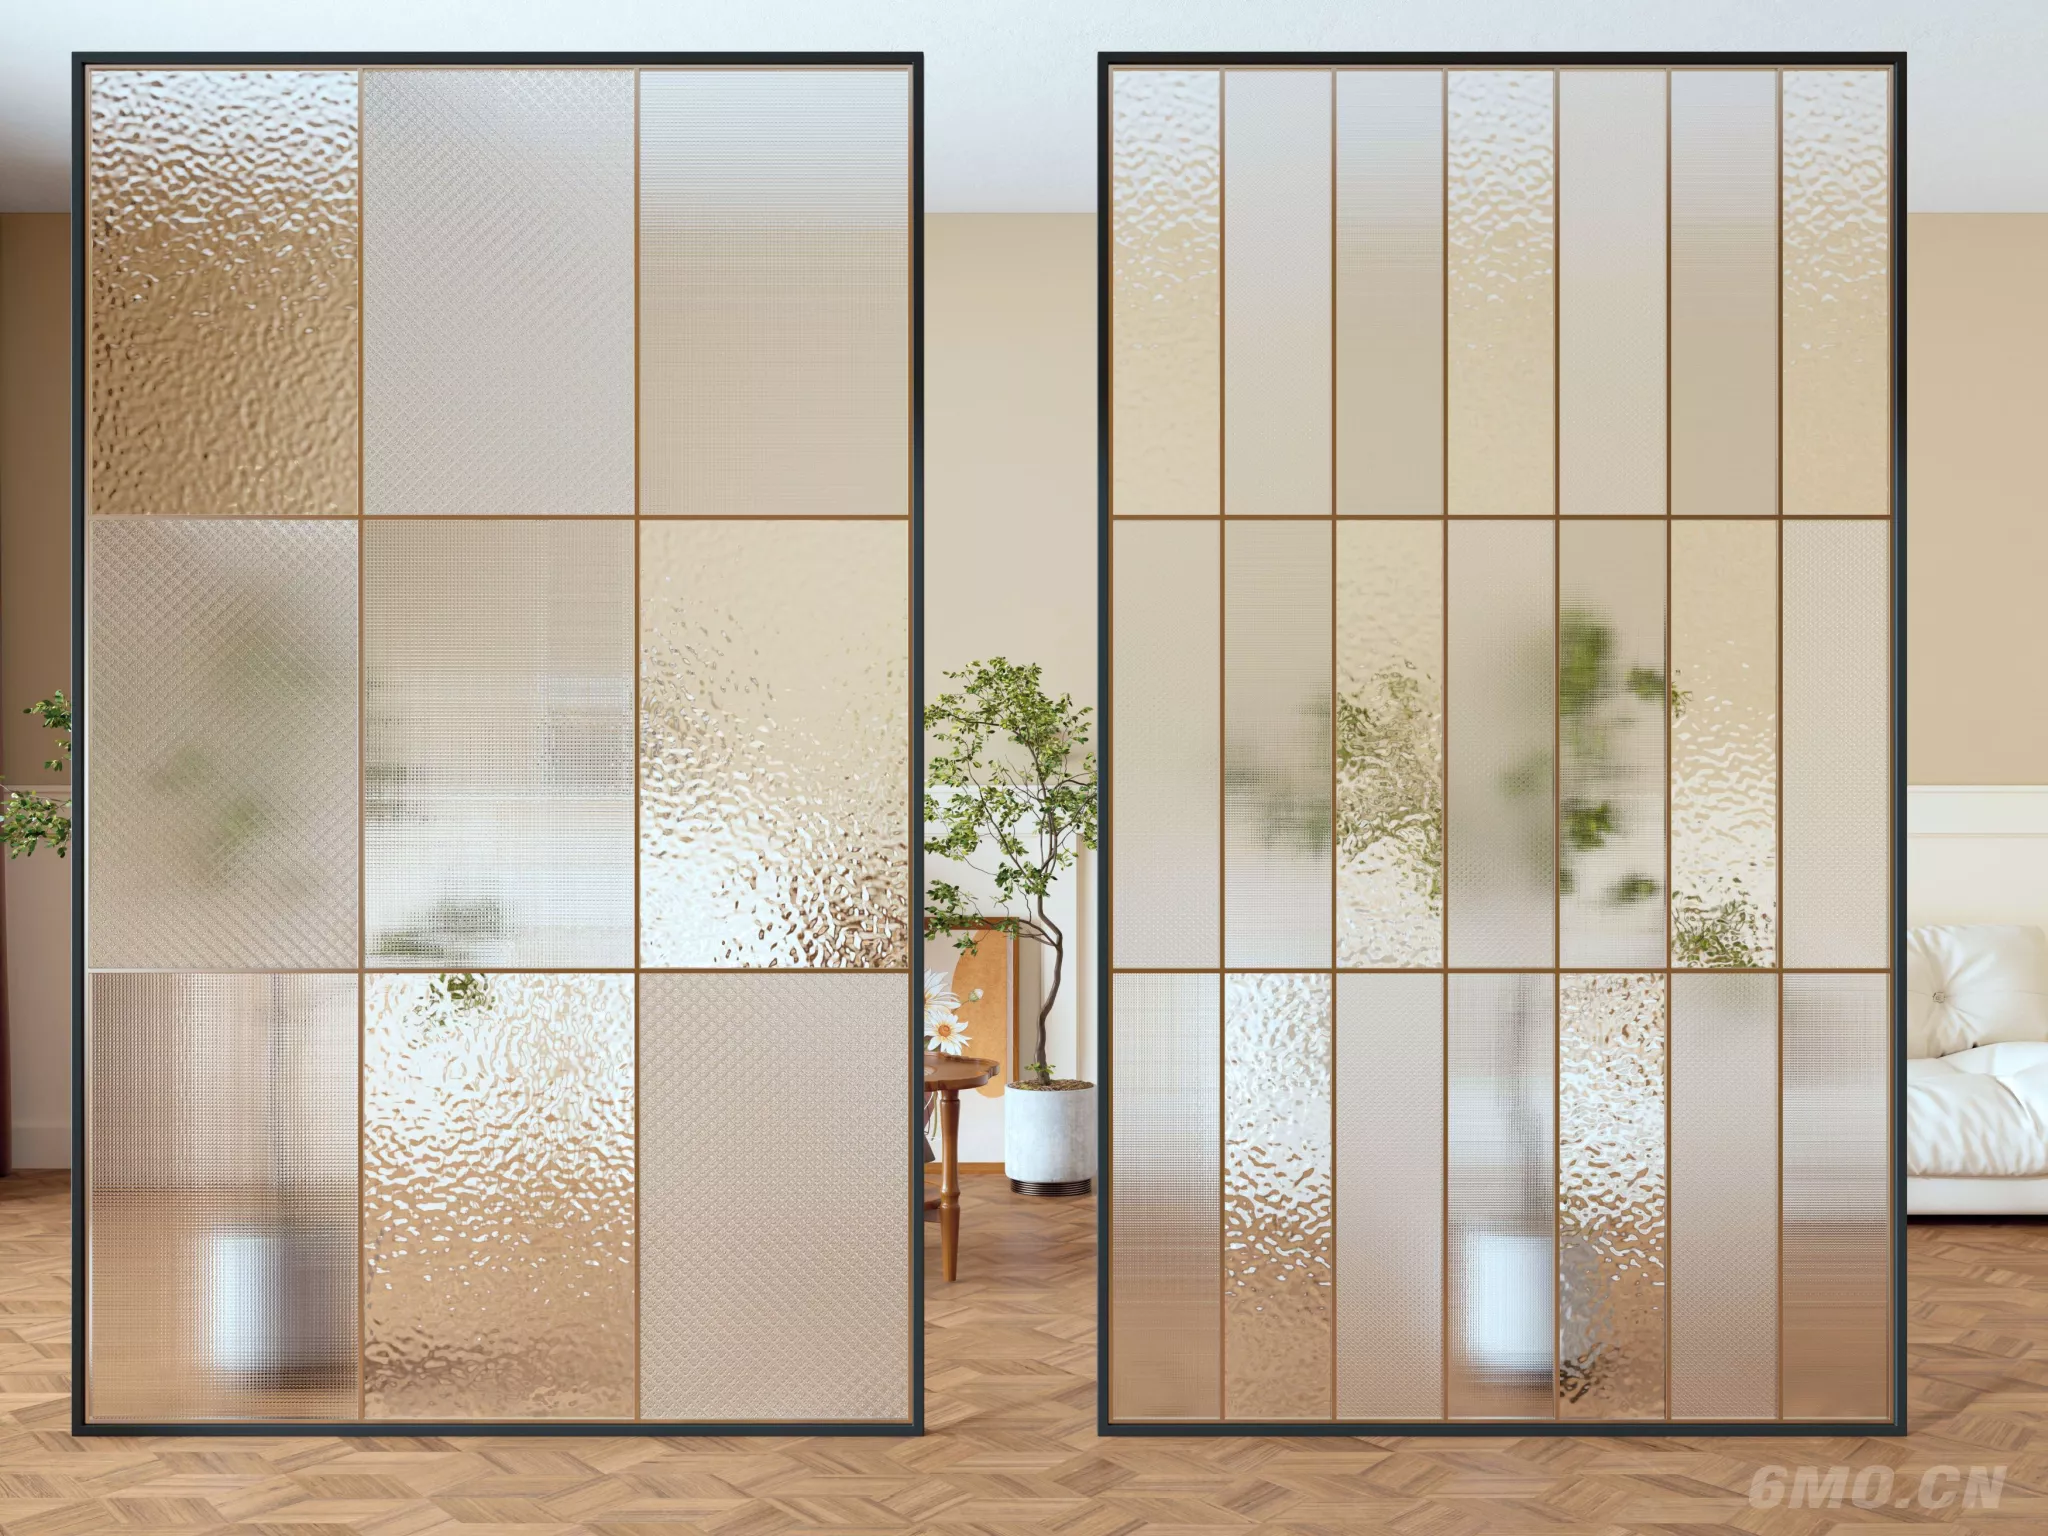 MODERN PARTITION SCREEN - SKETCHUP 3D MODEL - VRAY - 271336